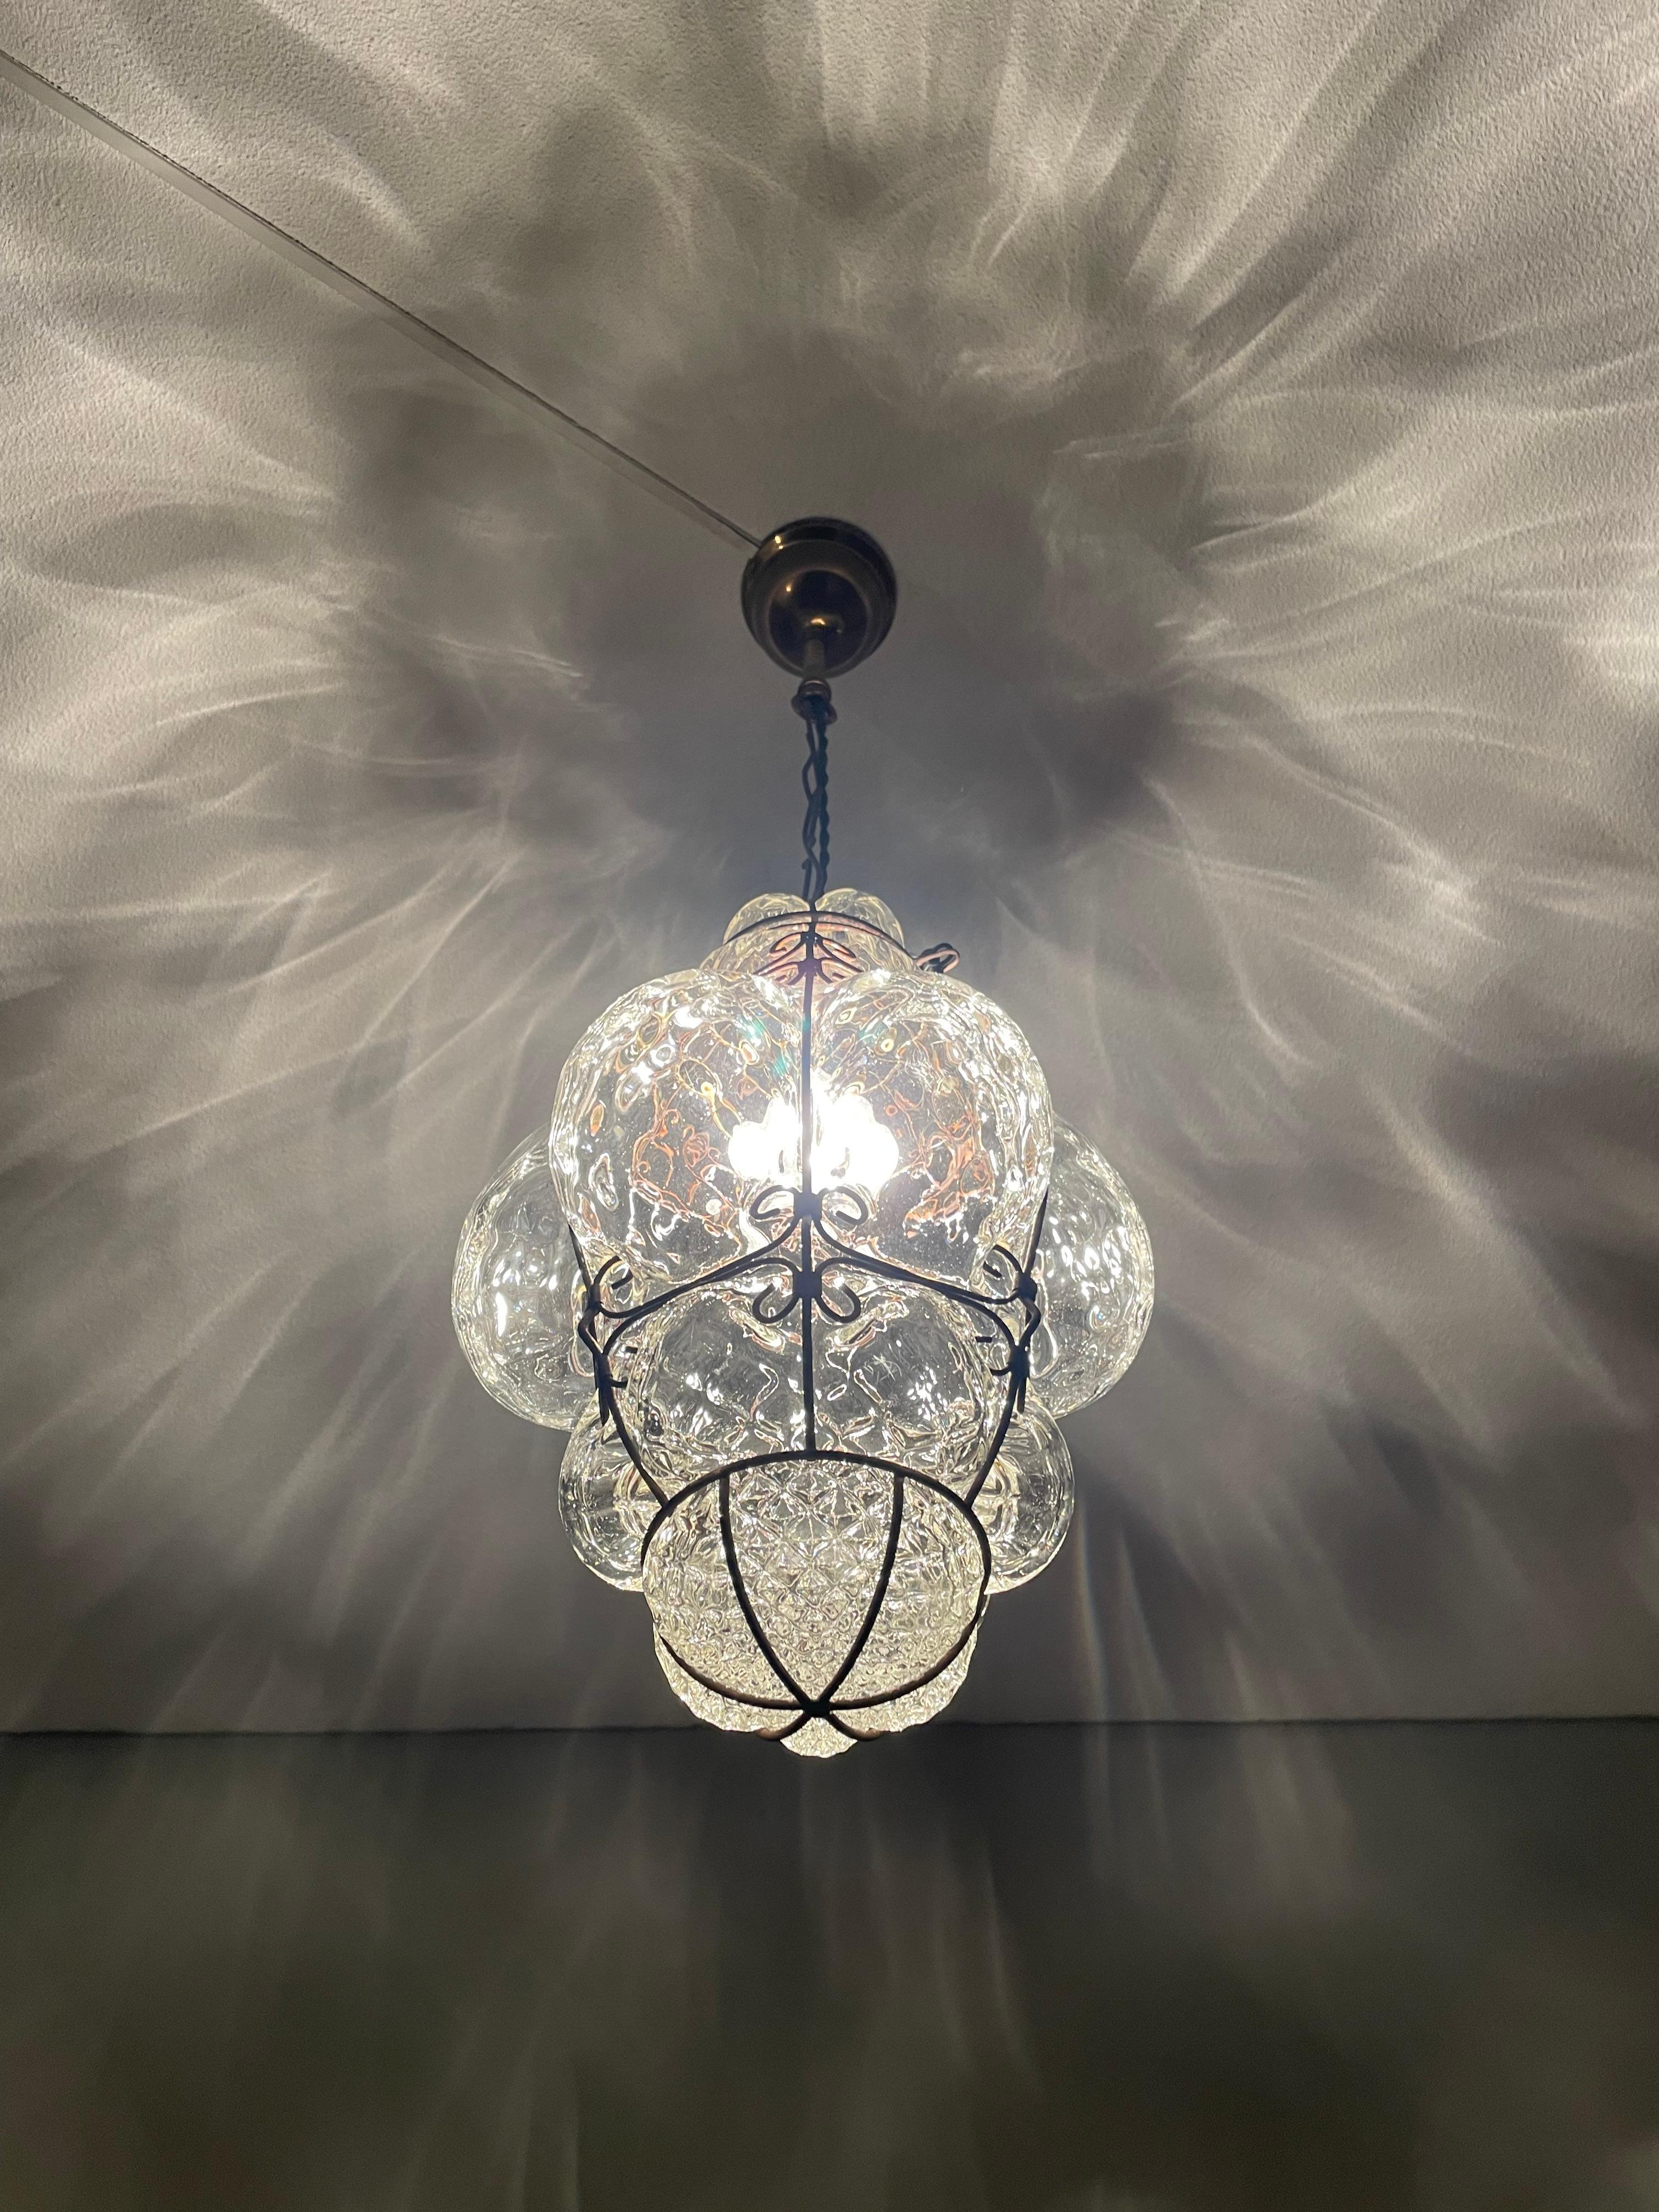 Rare and highly decorative Venetian light fixture with diamond pattern in the glass.

This striking glass art pendant from midcentury Italy is another one of our recent great finds. Handcrafted and mouthblown in one of the Venetian glass art studios